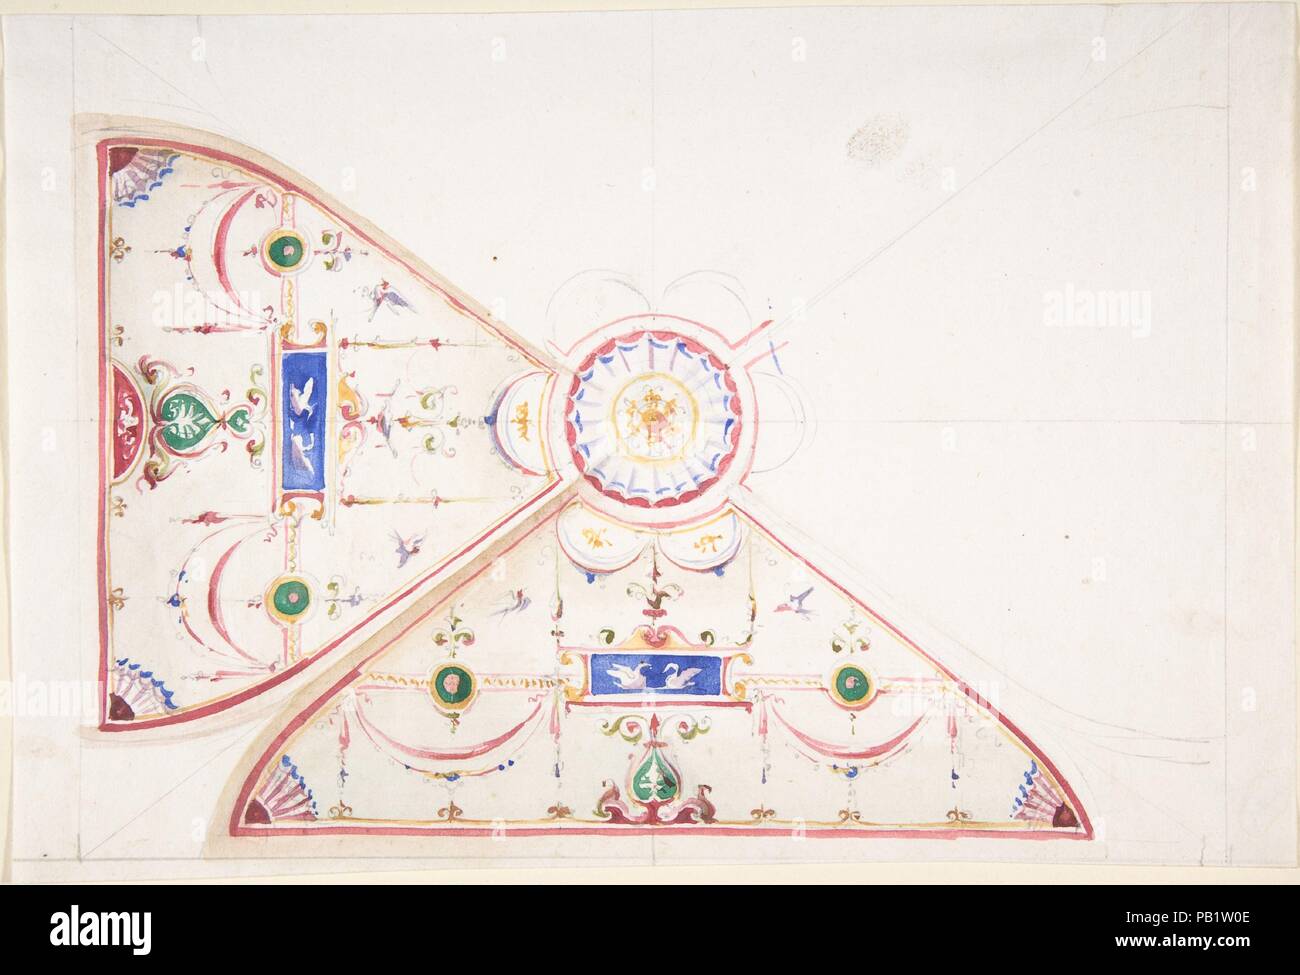 Design for a Painted Ceiling. Artist: Anonymous, Italian, 19th century. Dimensions: 6-3/8 x 9-3/8 in. Date: 1825-75. Museum: Metropolitan Museum of Art, New York, USA. Stock Photo